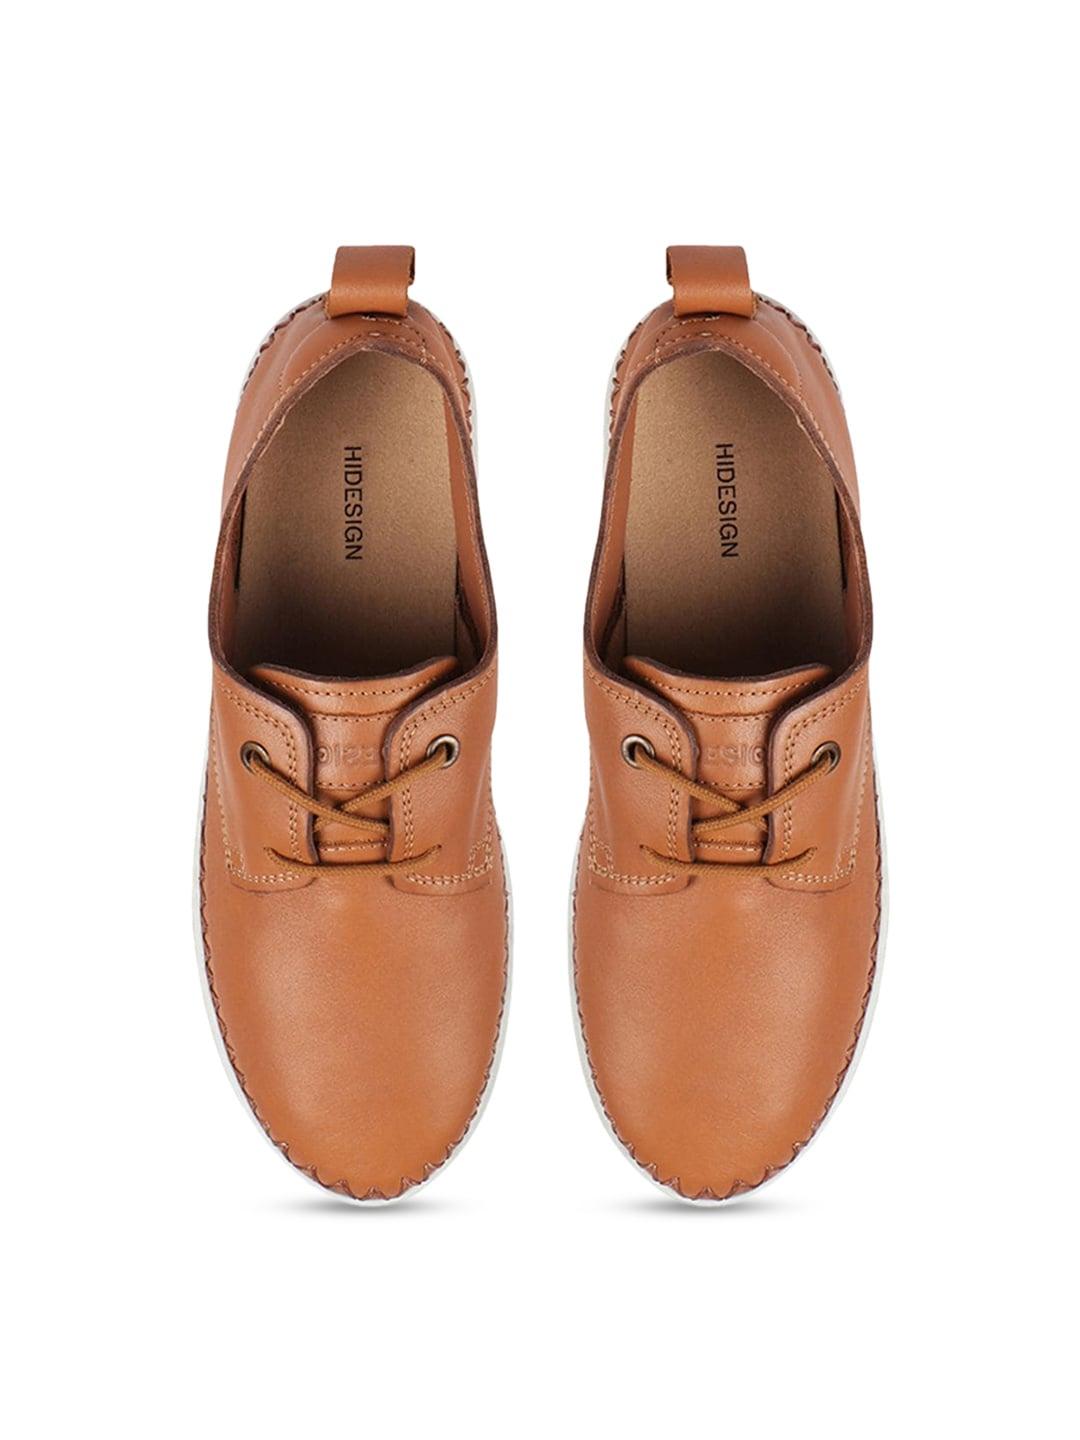 hidesign-women-andes-leather-derbys